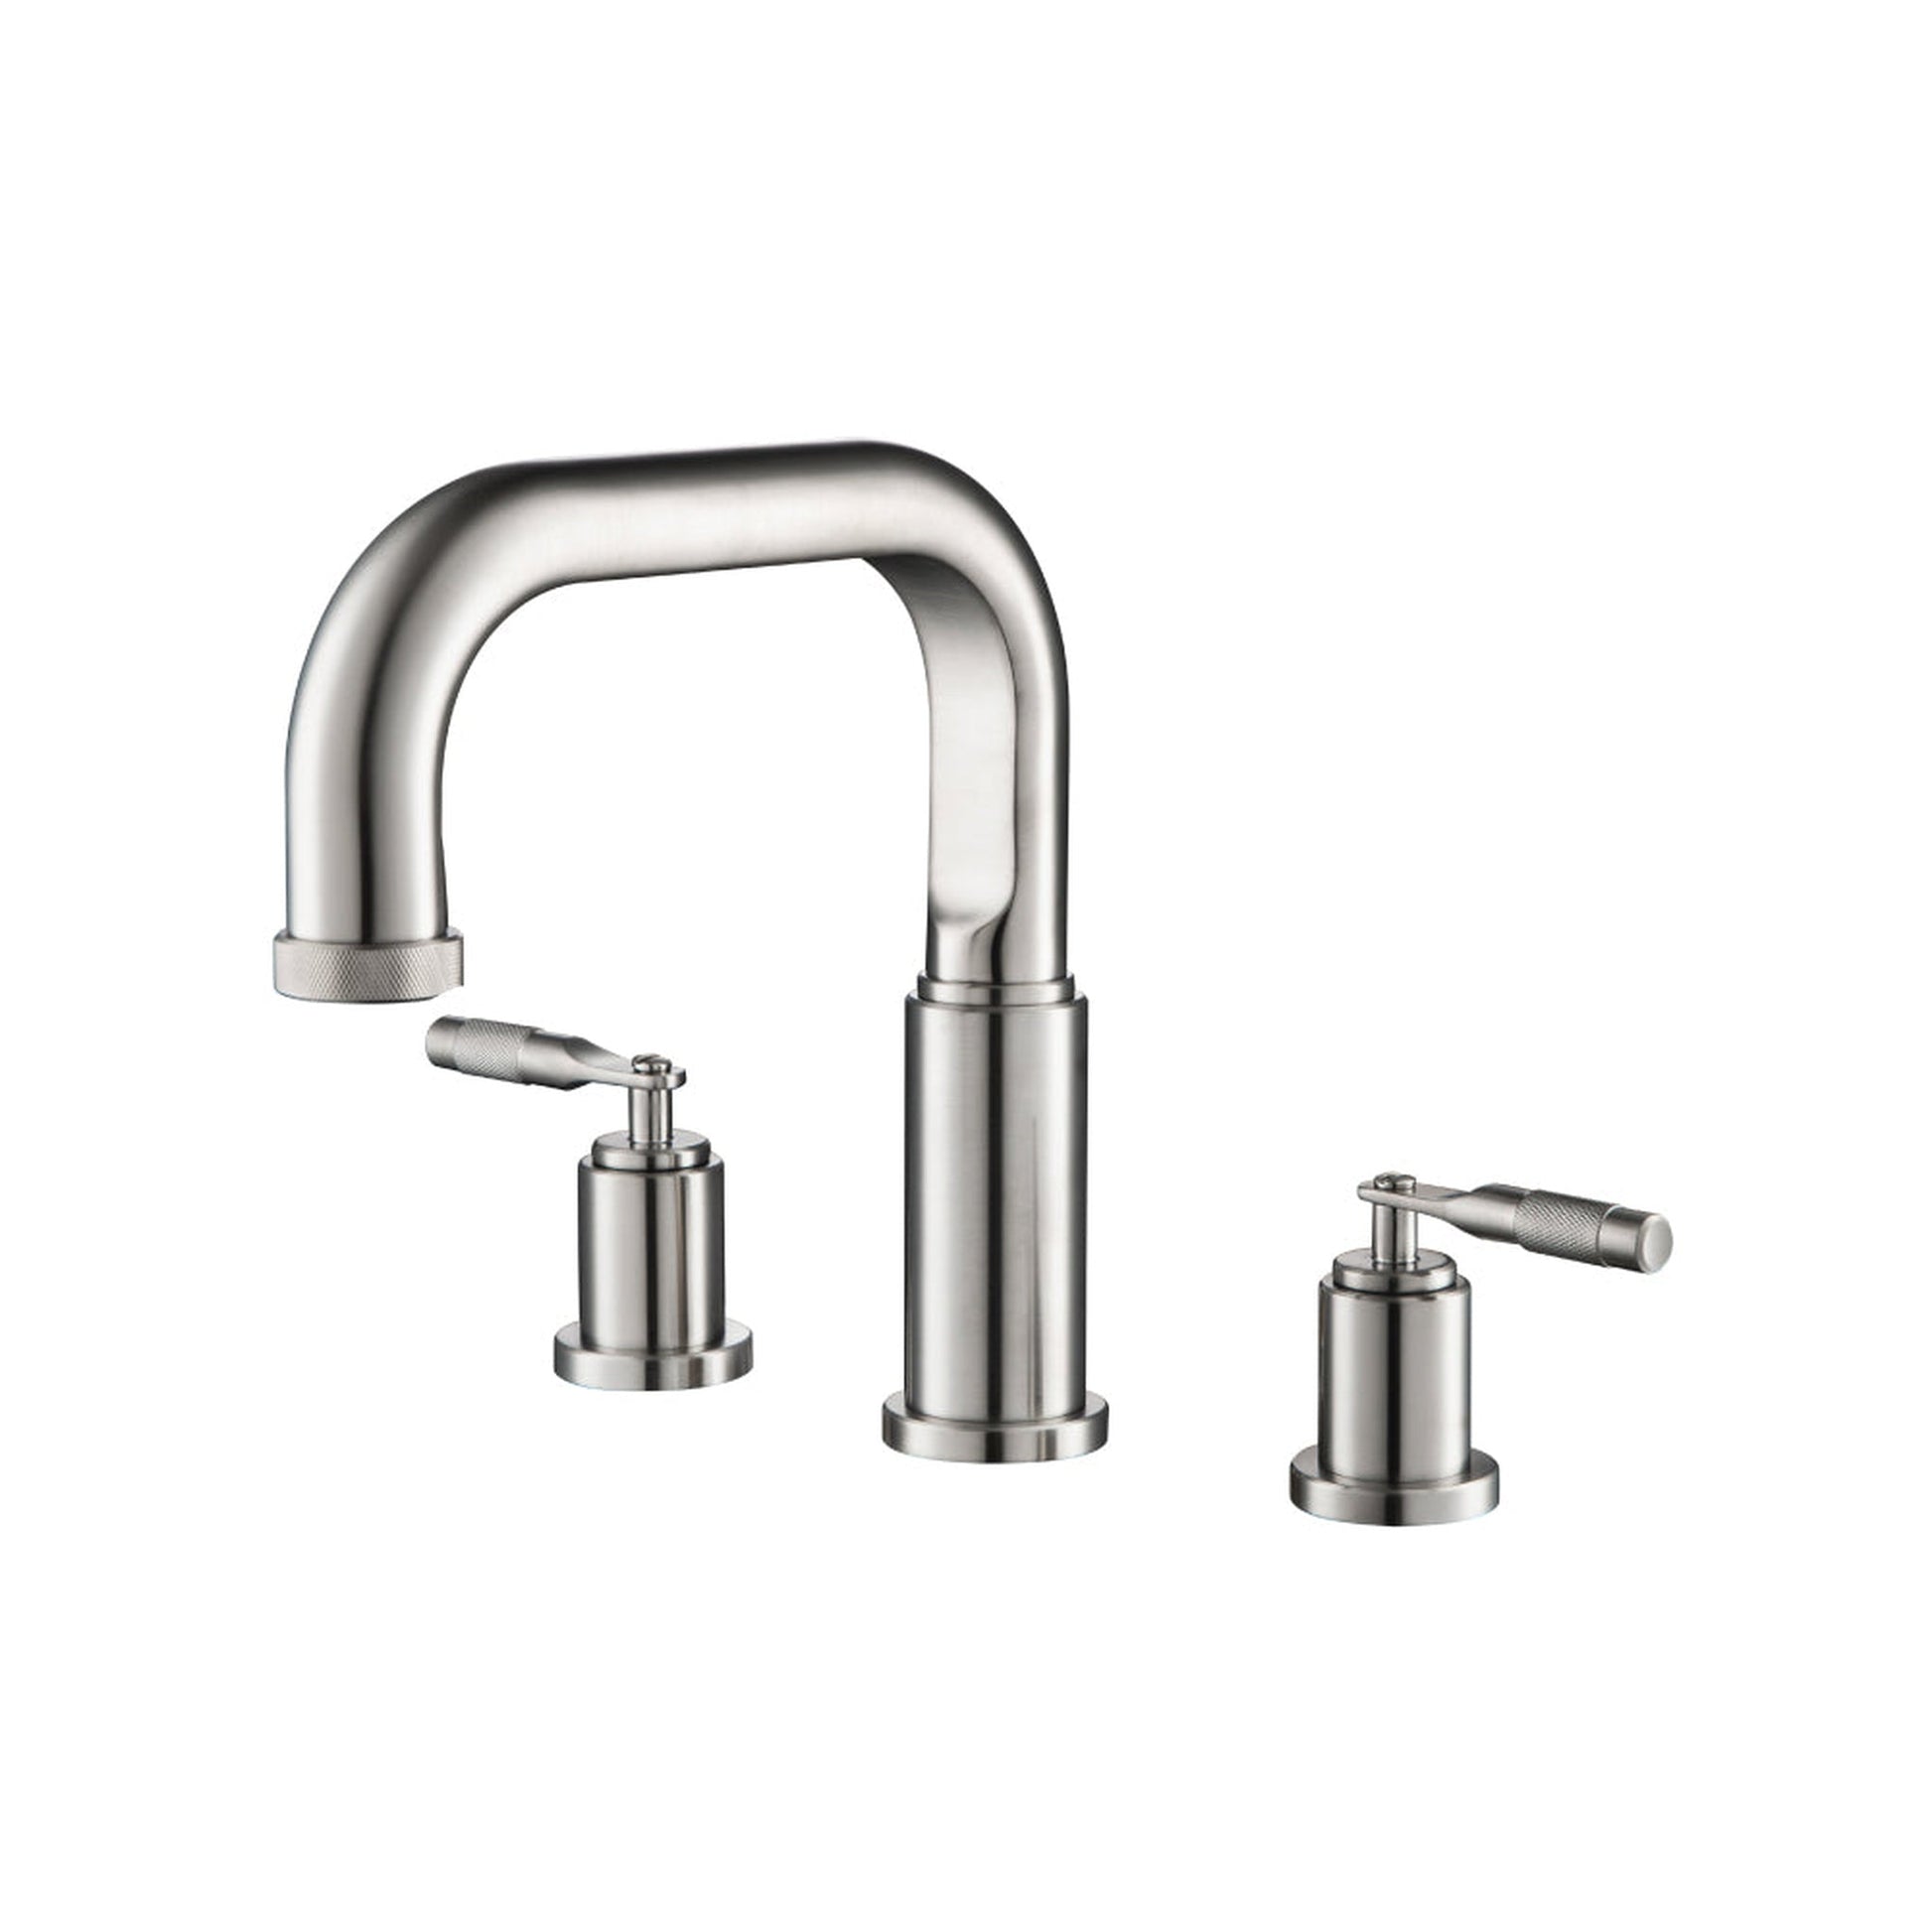 Isenberg Serie 250 14" Three-Hole Brushed Nickel PVD Solid Brass Deck-Mounted Roman Bathtub Faucet